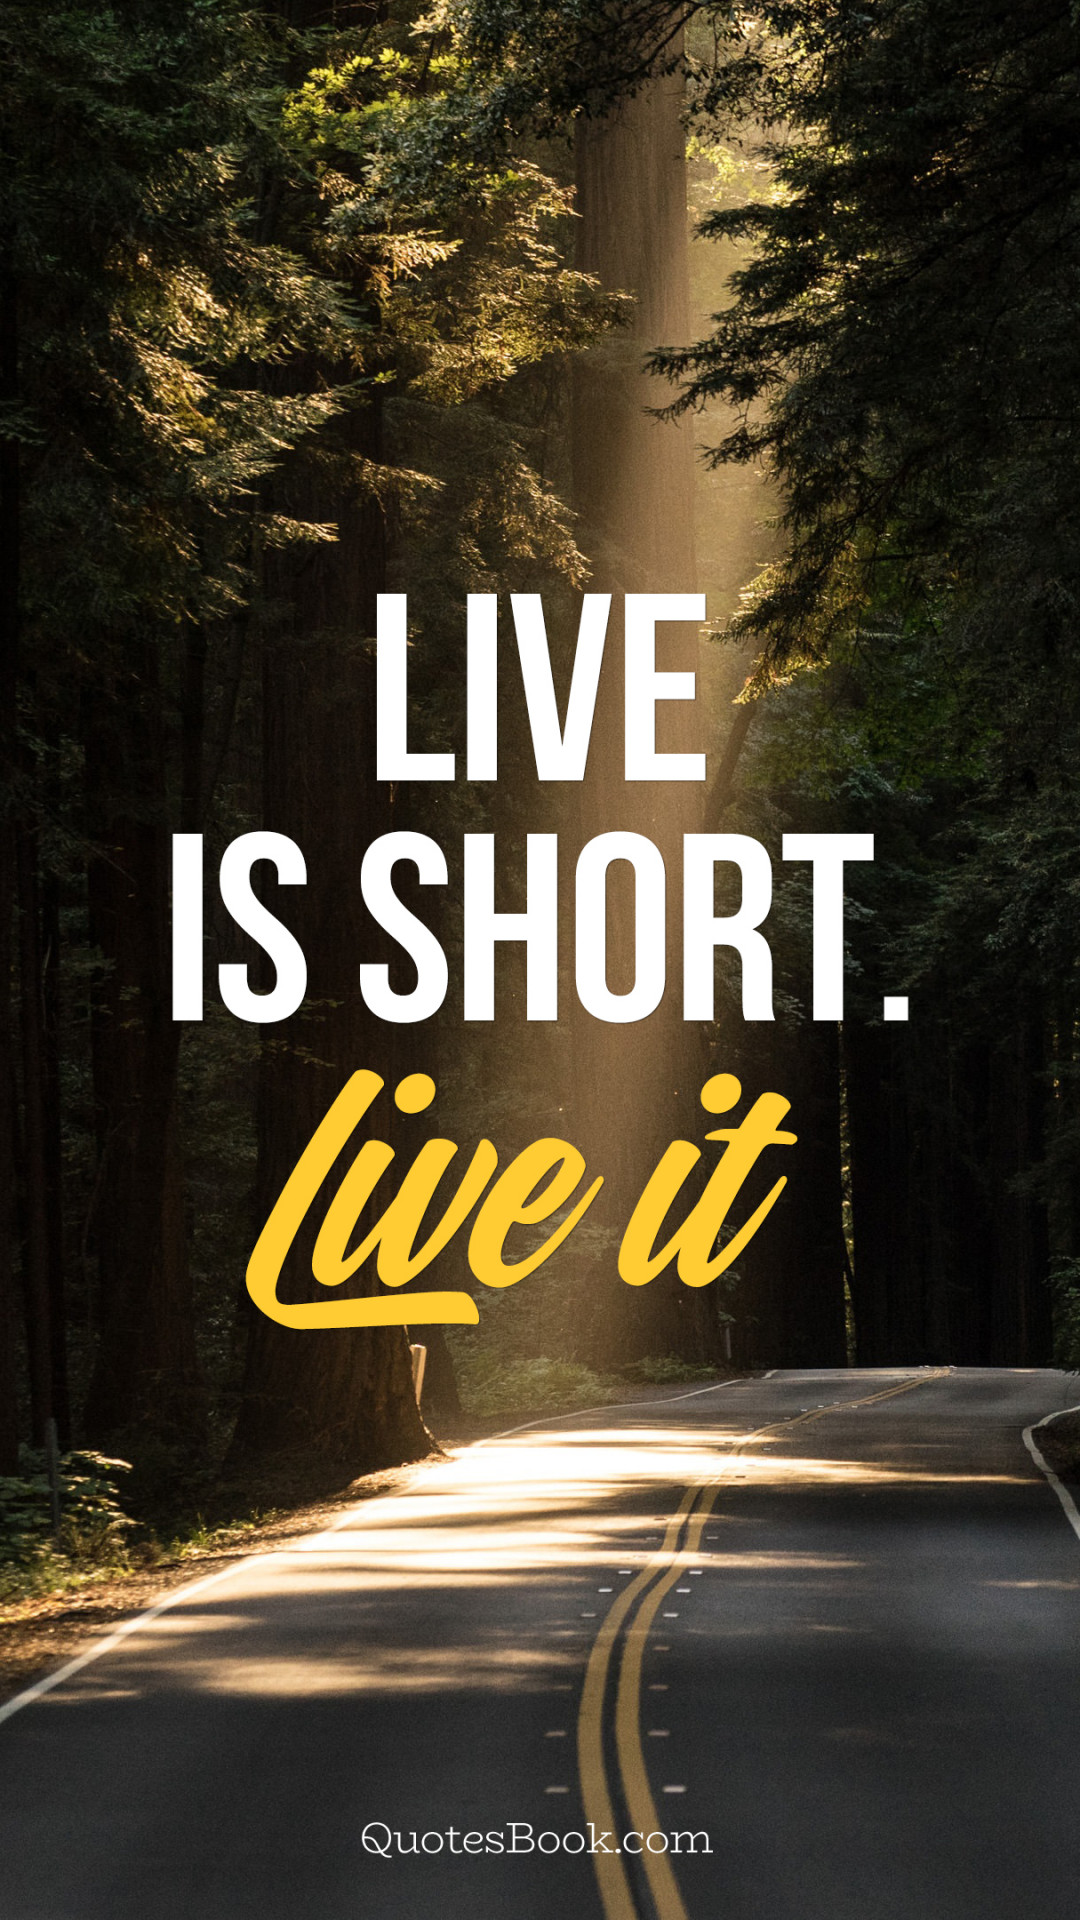 Life is short. Live it - QuotesBook